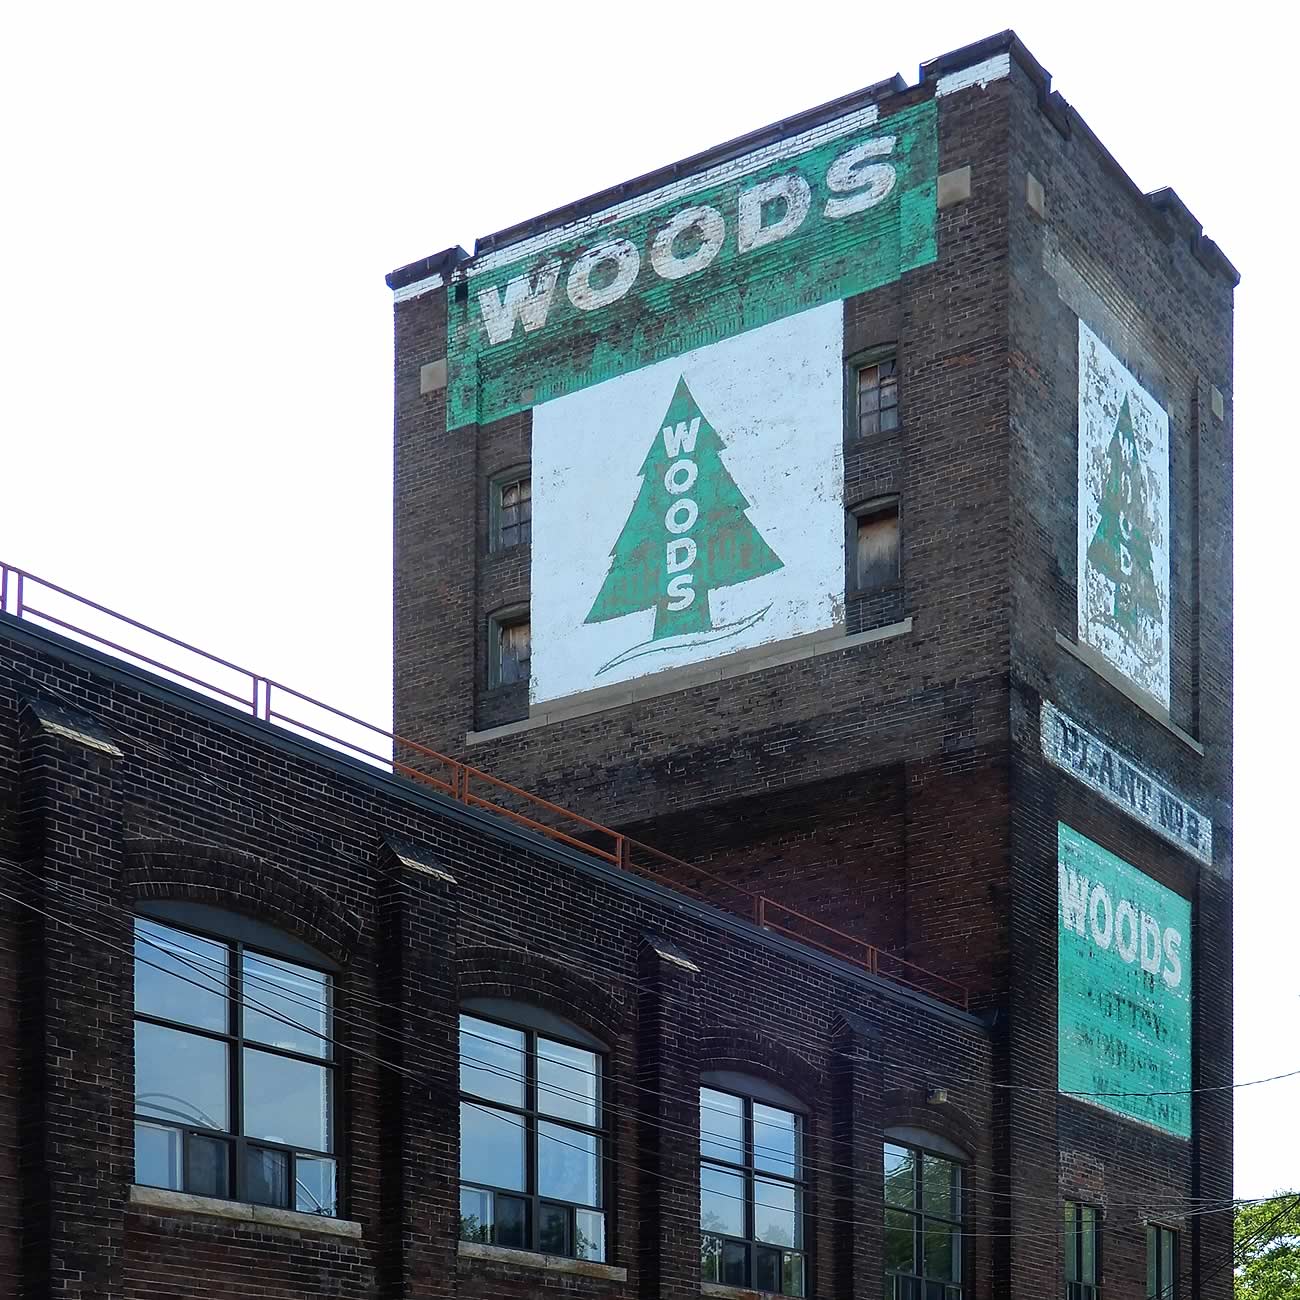 Colour image of an industrial brick building with a water tower at the end. The water tower is painted with a logo for 'Woods': an evergreen tree with the words Woods vertically across.